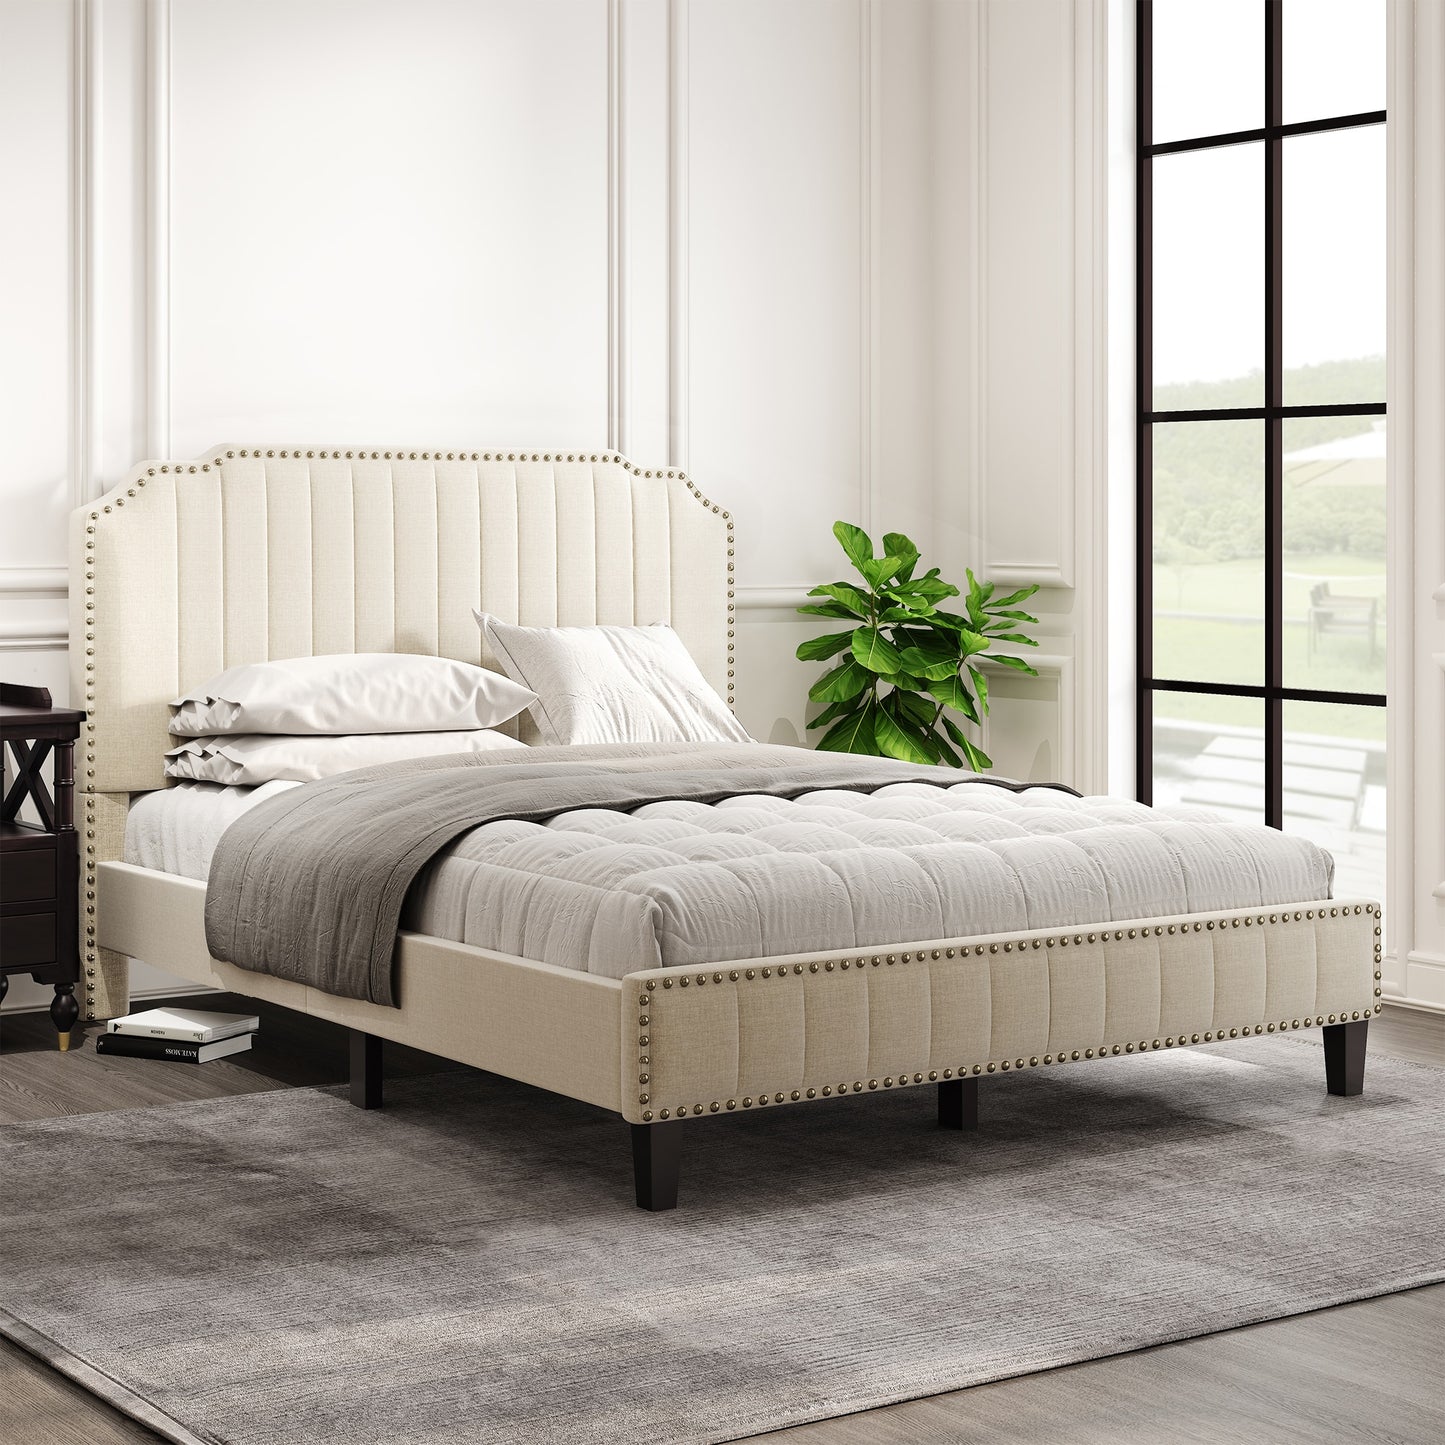 TWIN/FULL /KING/QUEEN Size Modern Linen Curved Upholstered Platform Bed  Solid Wood Frame Nailhead Trim